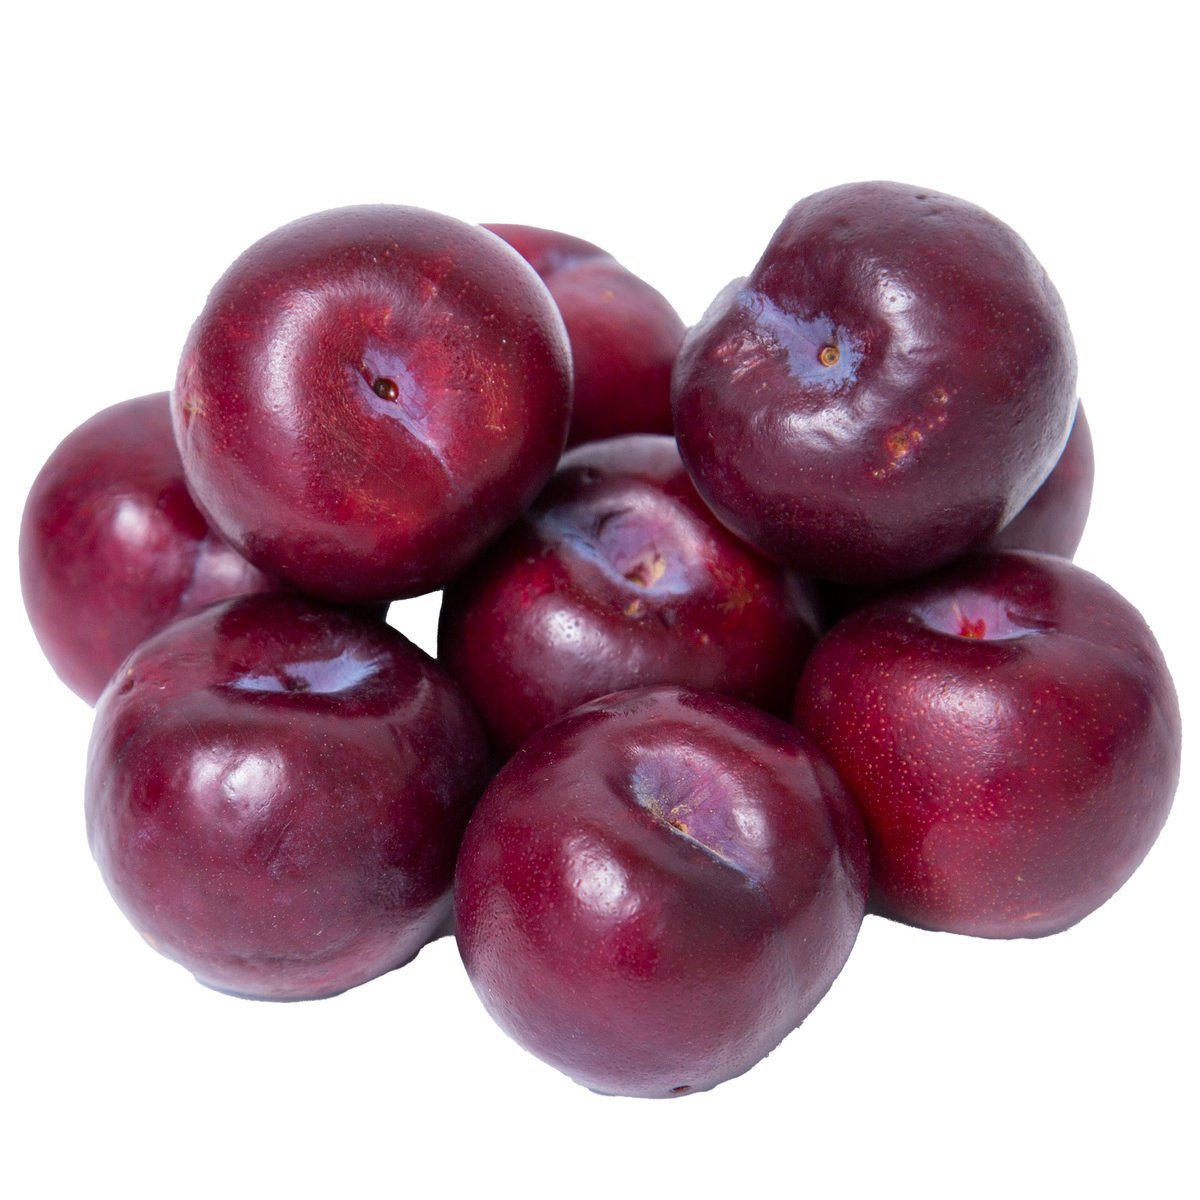 Plums Black South Africa 1 kg